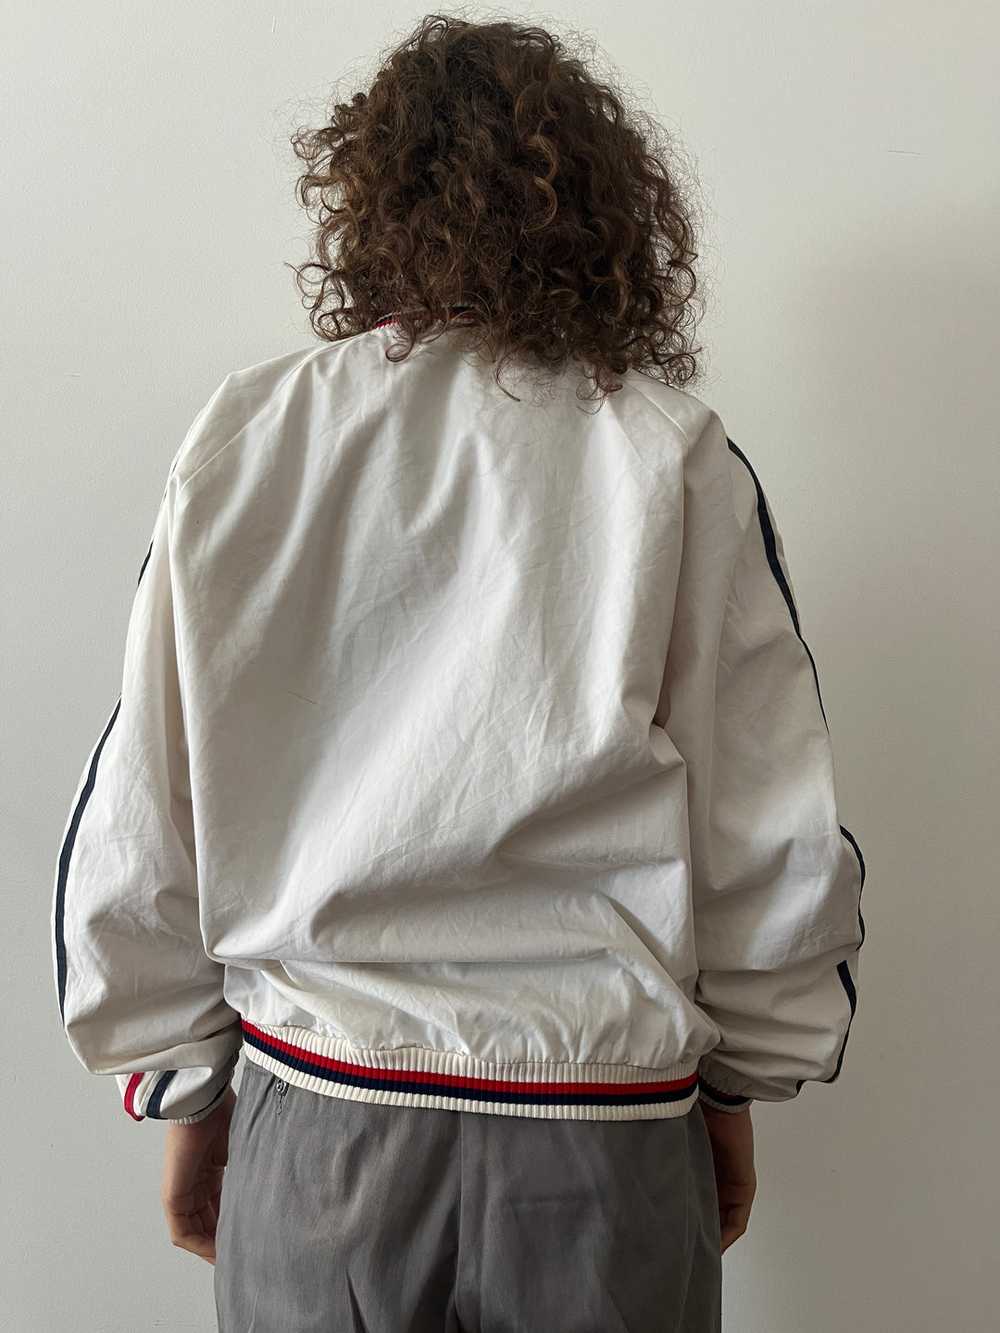 70s Fred Perry Tennis Jacket - image 5